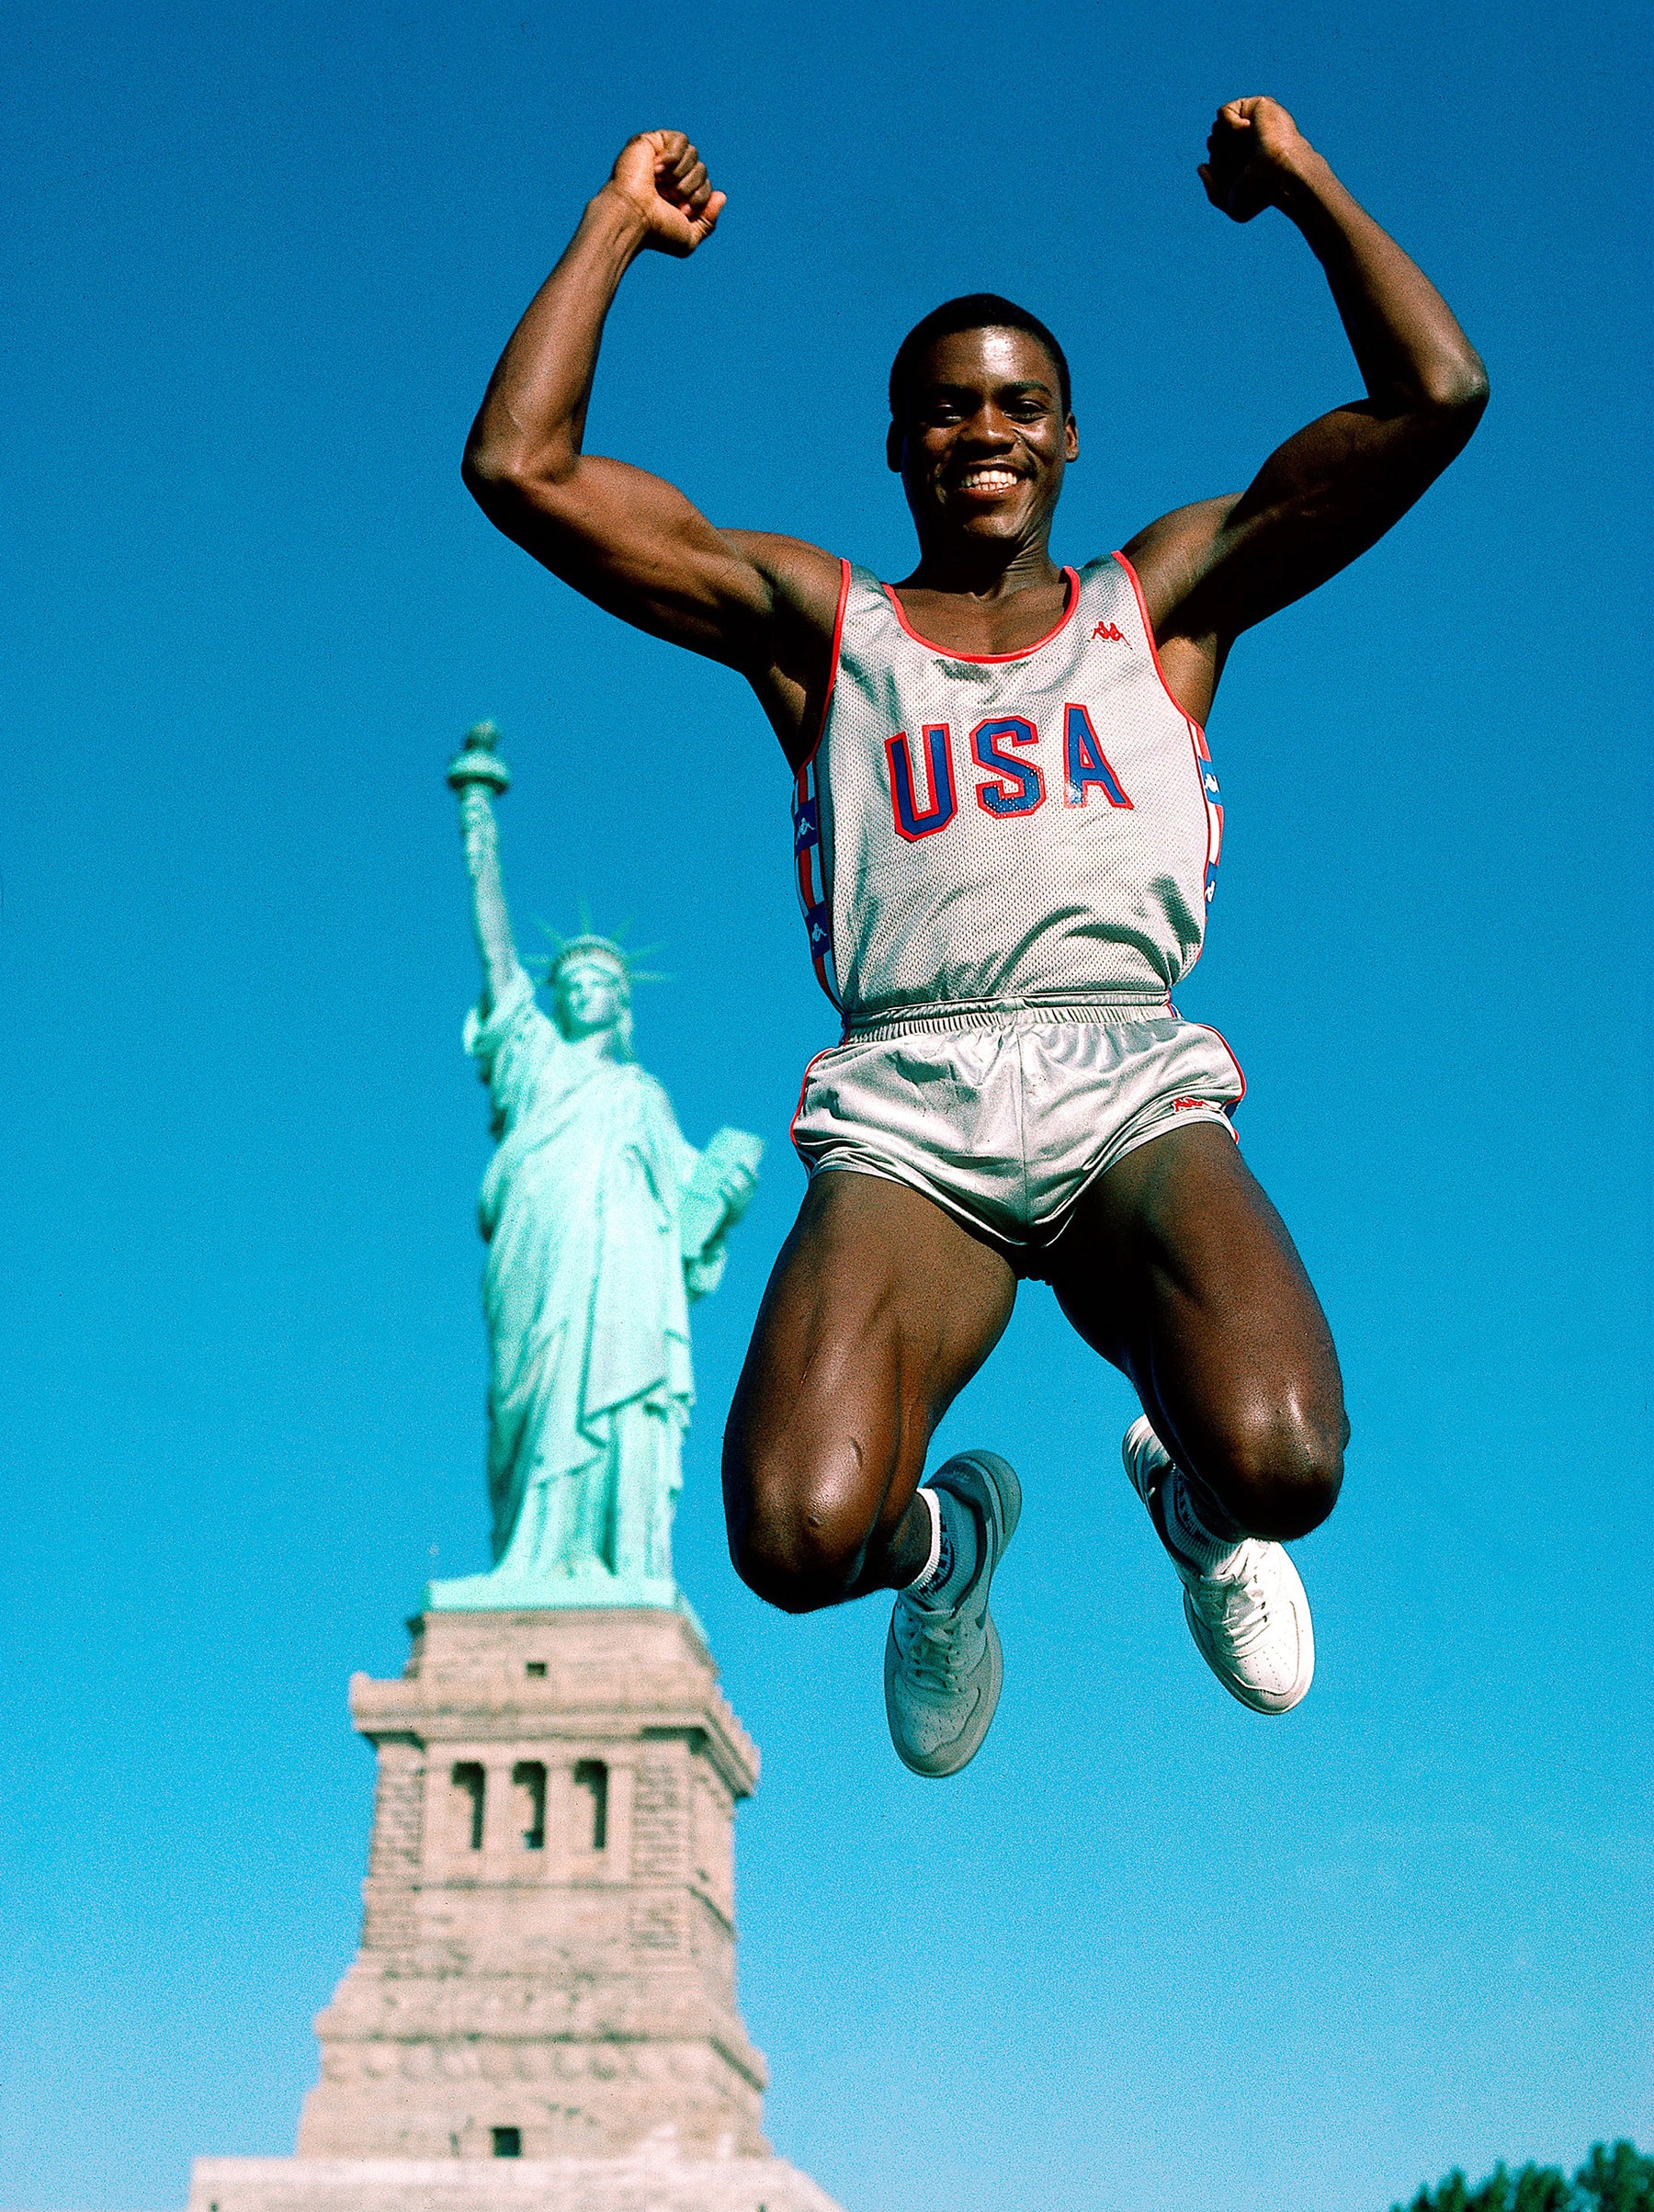 Carl Lewis at the Statue of Liberty